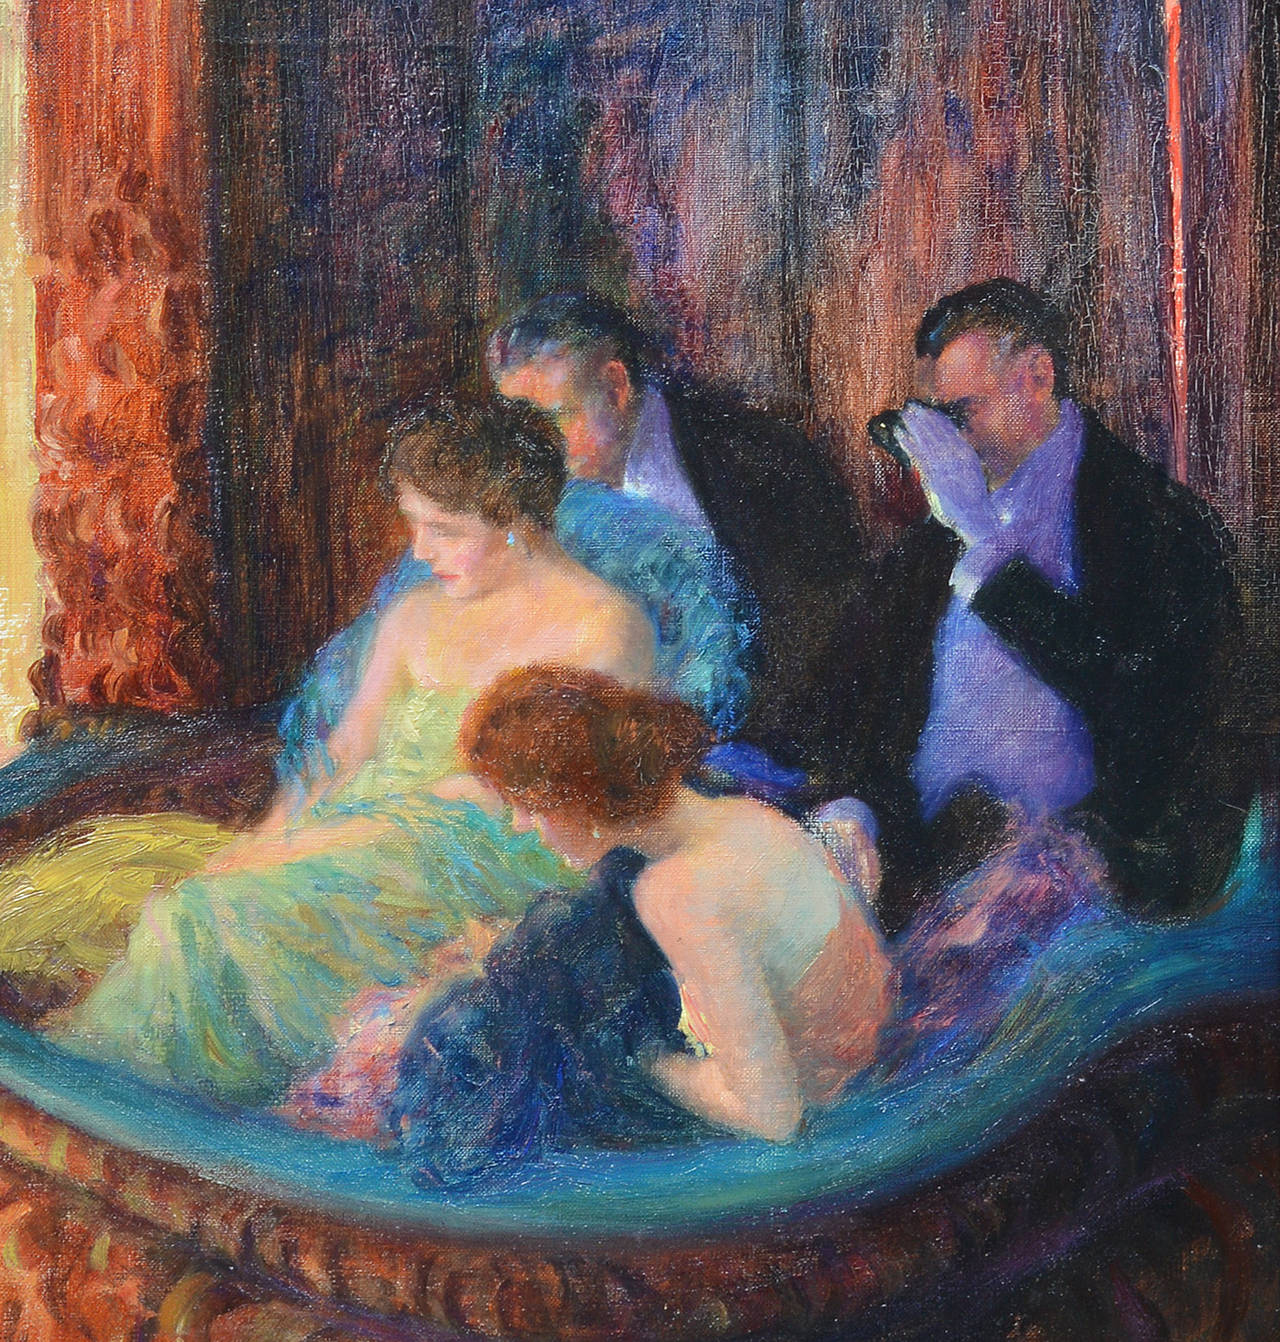  Antique Ashcan school painting of an opera.  Oil on canvas, circa 1920.  Signed in monogram lower right.  A few light spot touch ups.  Housed in a period modernist frame.  Measuring 15 by 18 inches.